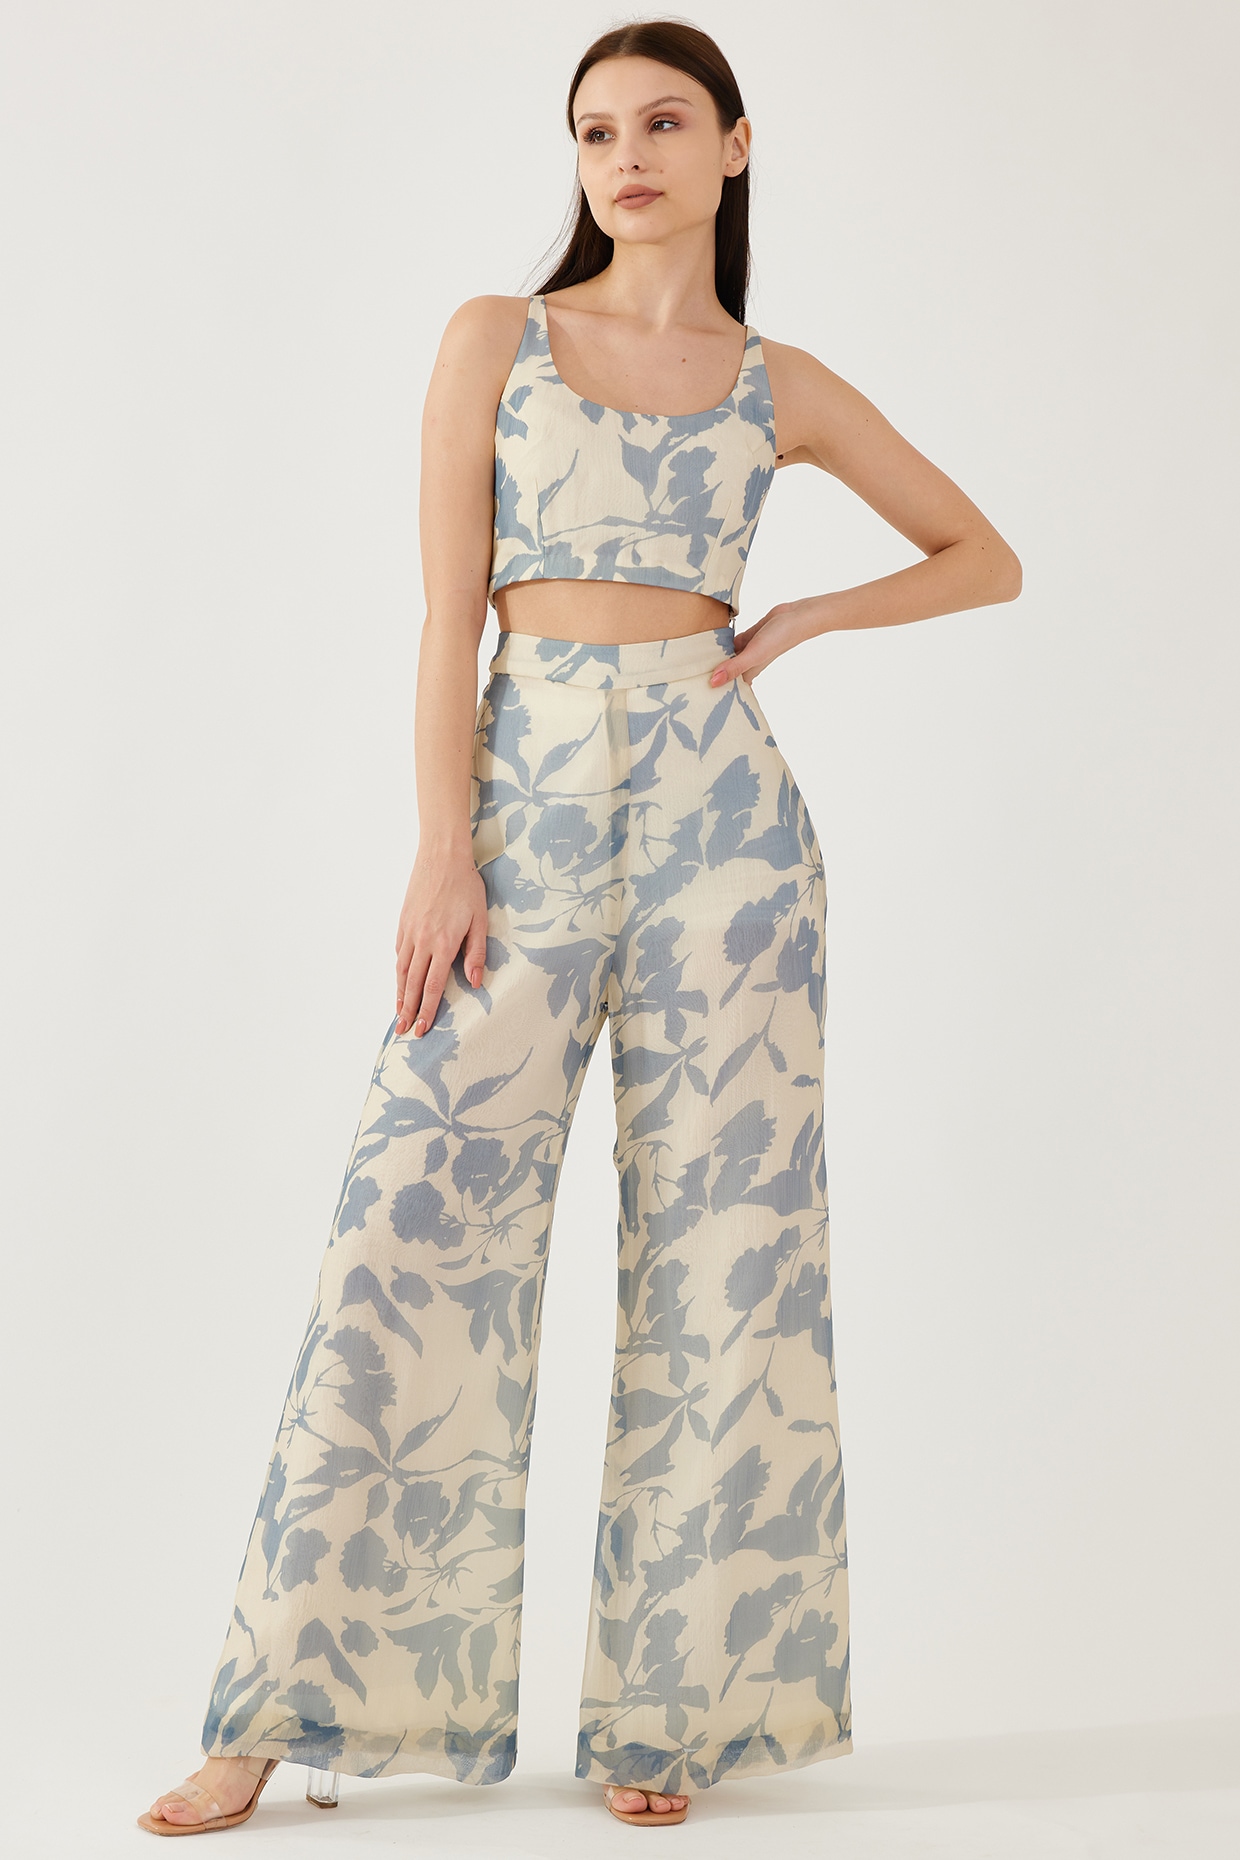 Charlotte Russe Floral Print High Waisted Palazzo Pants, $24 | Charlotte  Russe | Lookastic